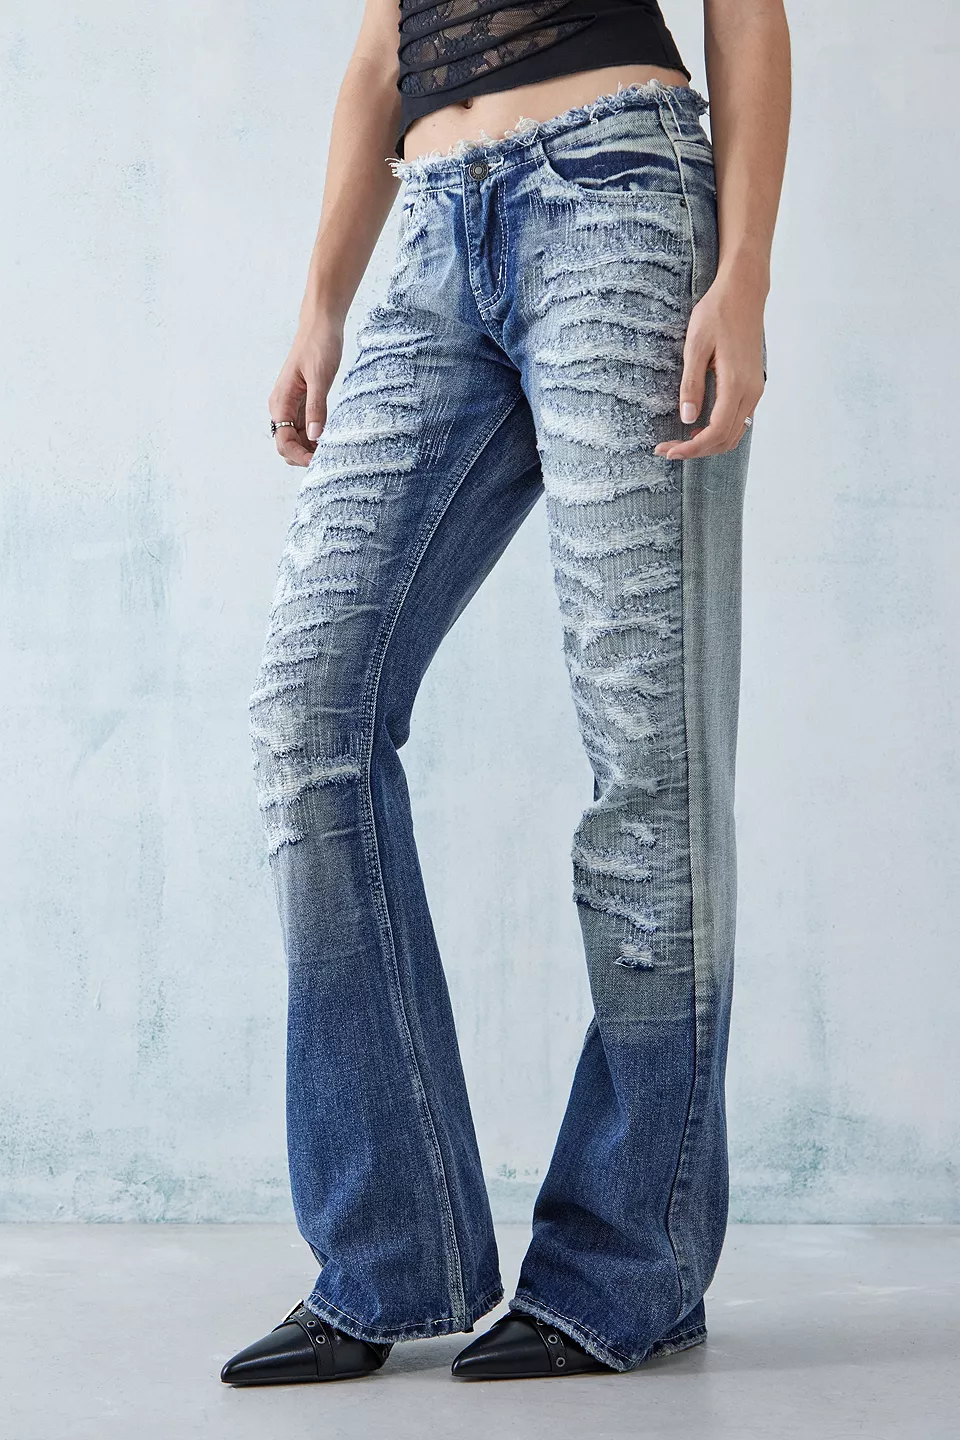 urbanoutfitters.com | Jaded London – Low-Rise-Jeans „Viper"